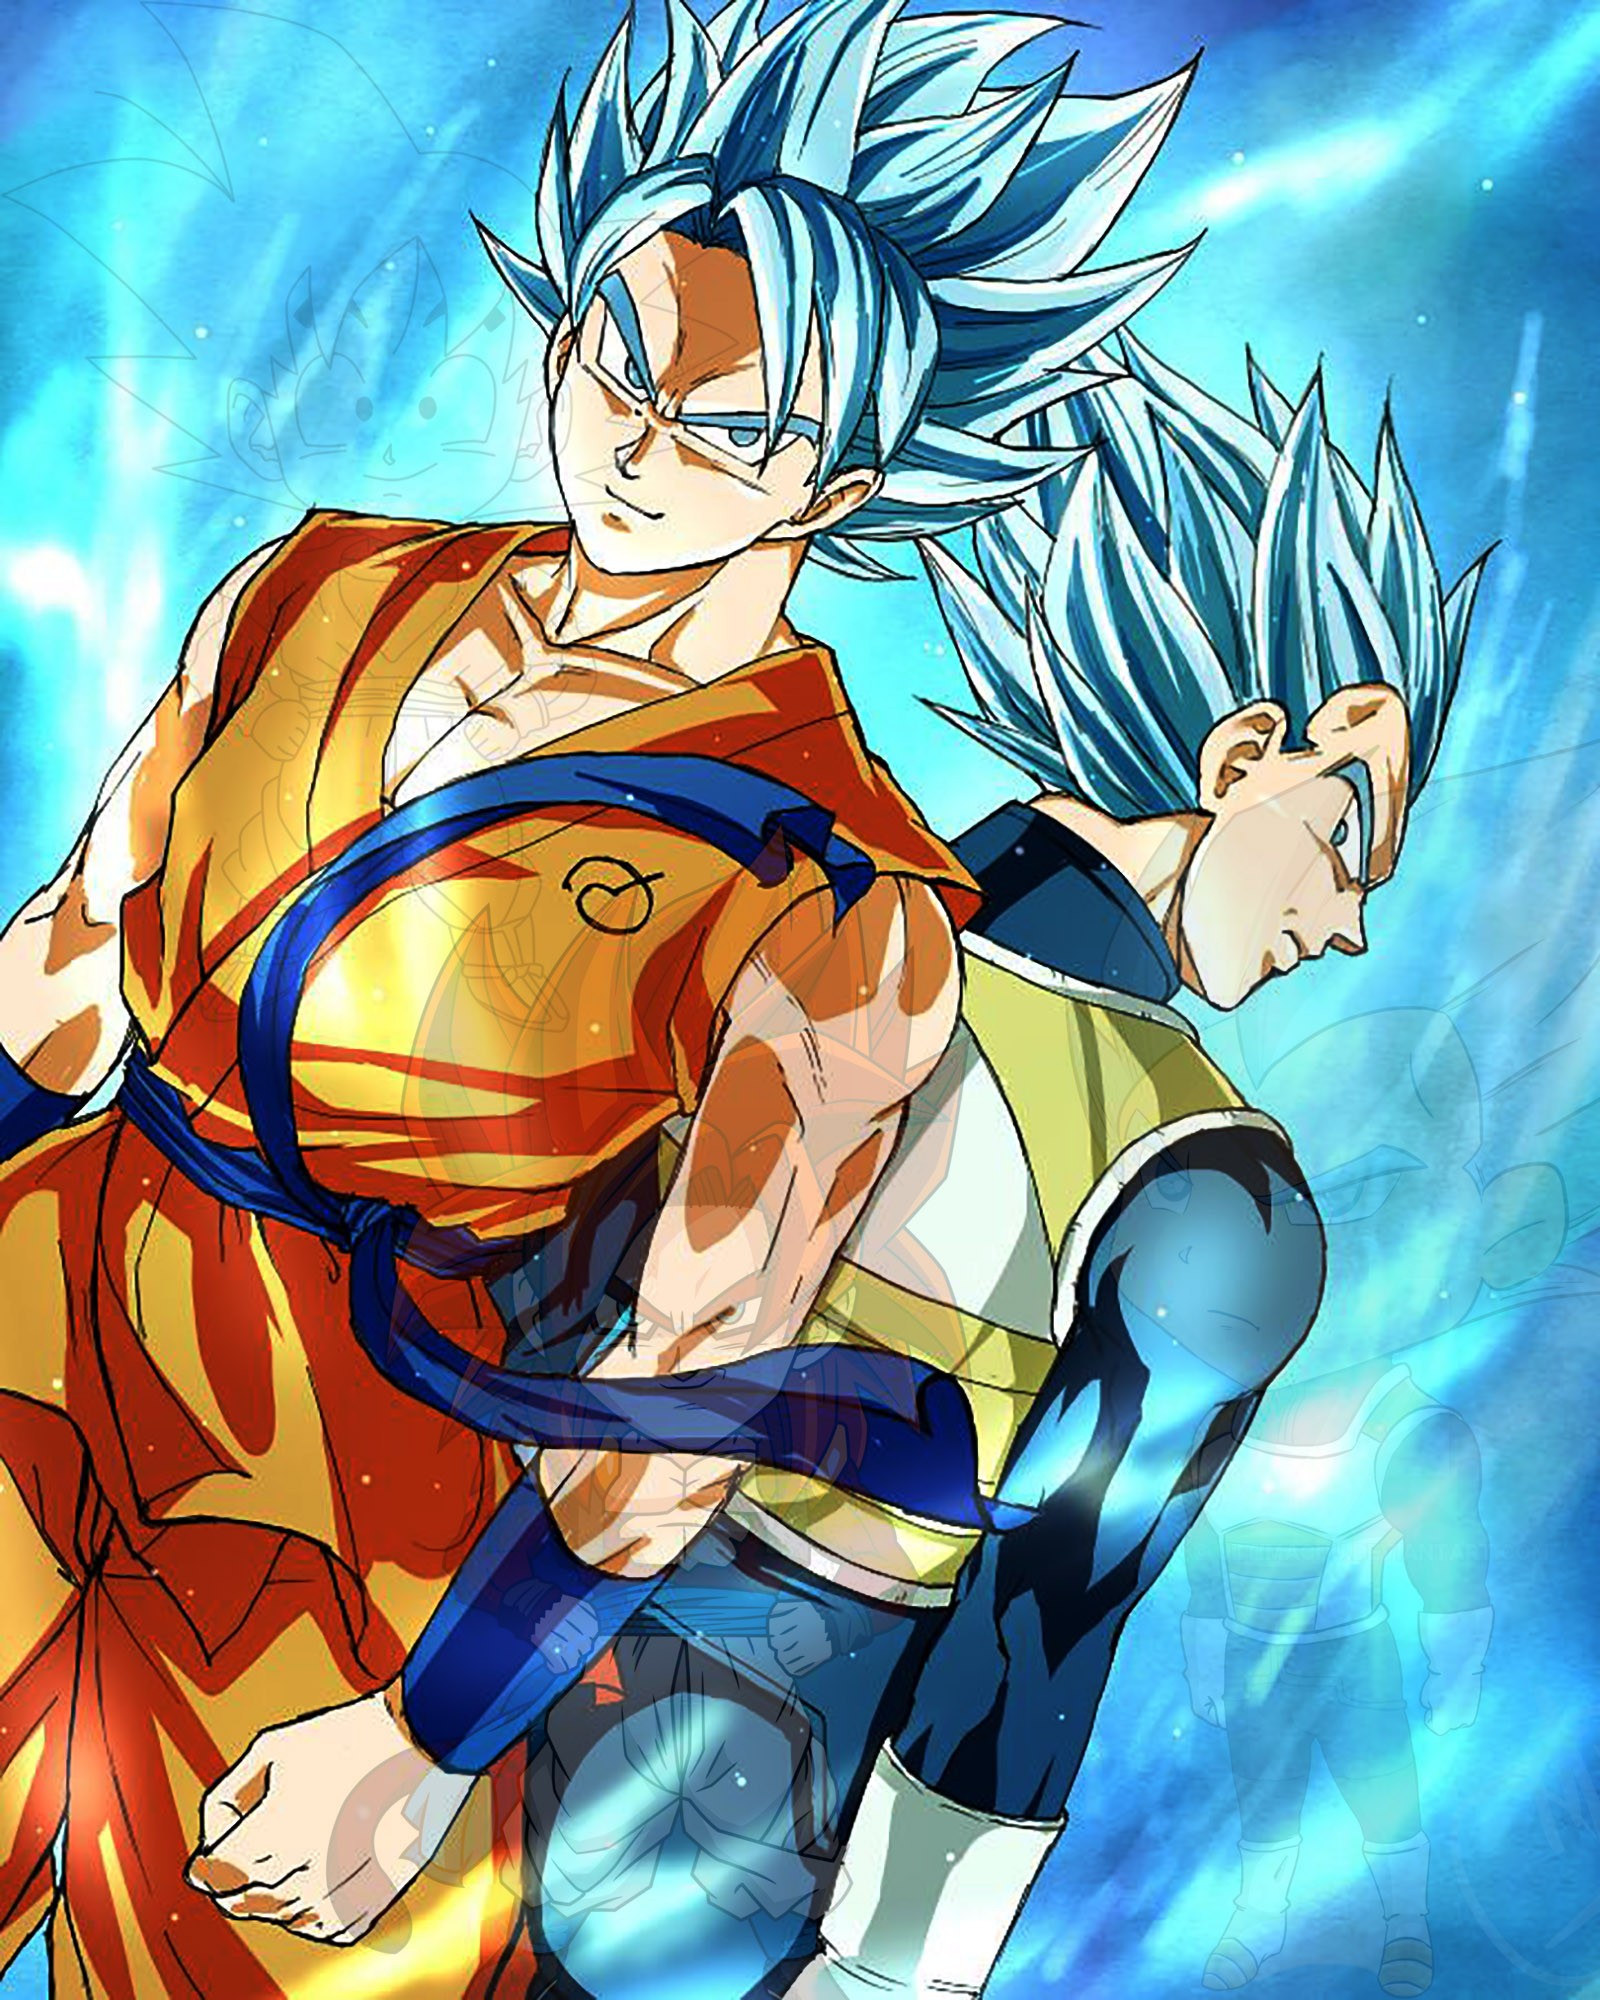 Dragon Ball Super Wallpaper Download Free Awesome Full Hd Wallpapers For Desktop And Mobile